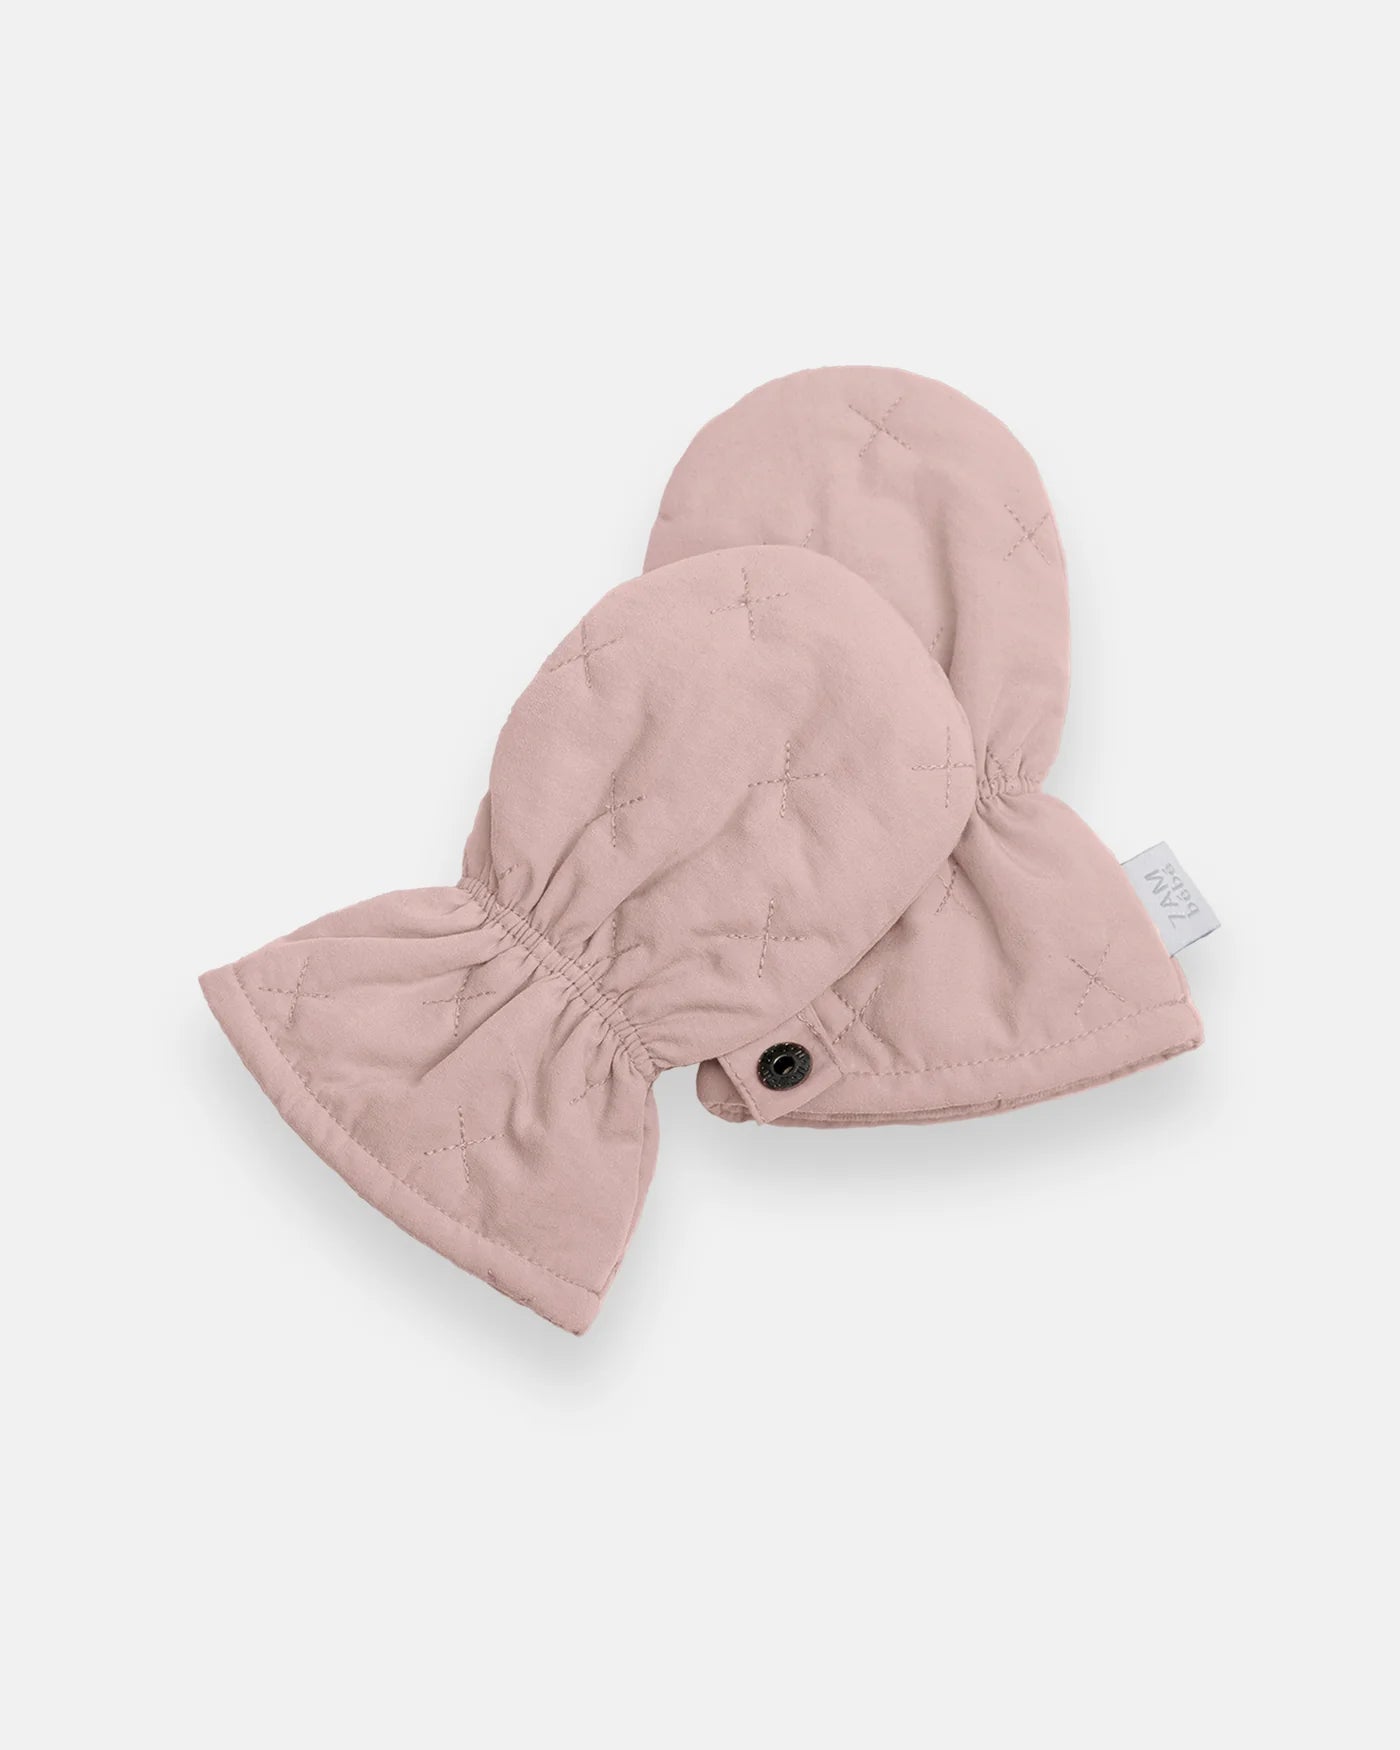 7 A.M. Enfant Cub Set Airy - Mittens, Hat & Blanket - Cameo - Twinkle Twinkle Little One